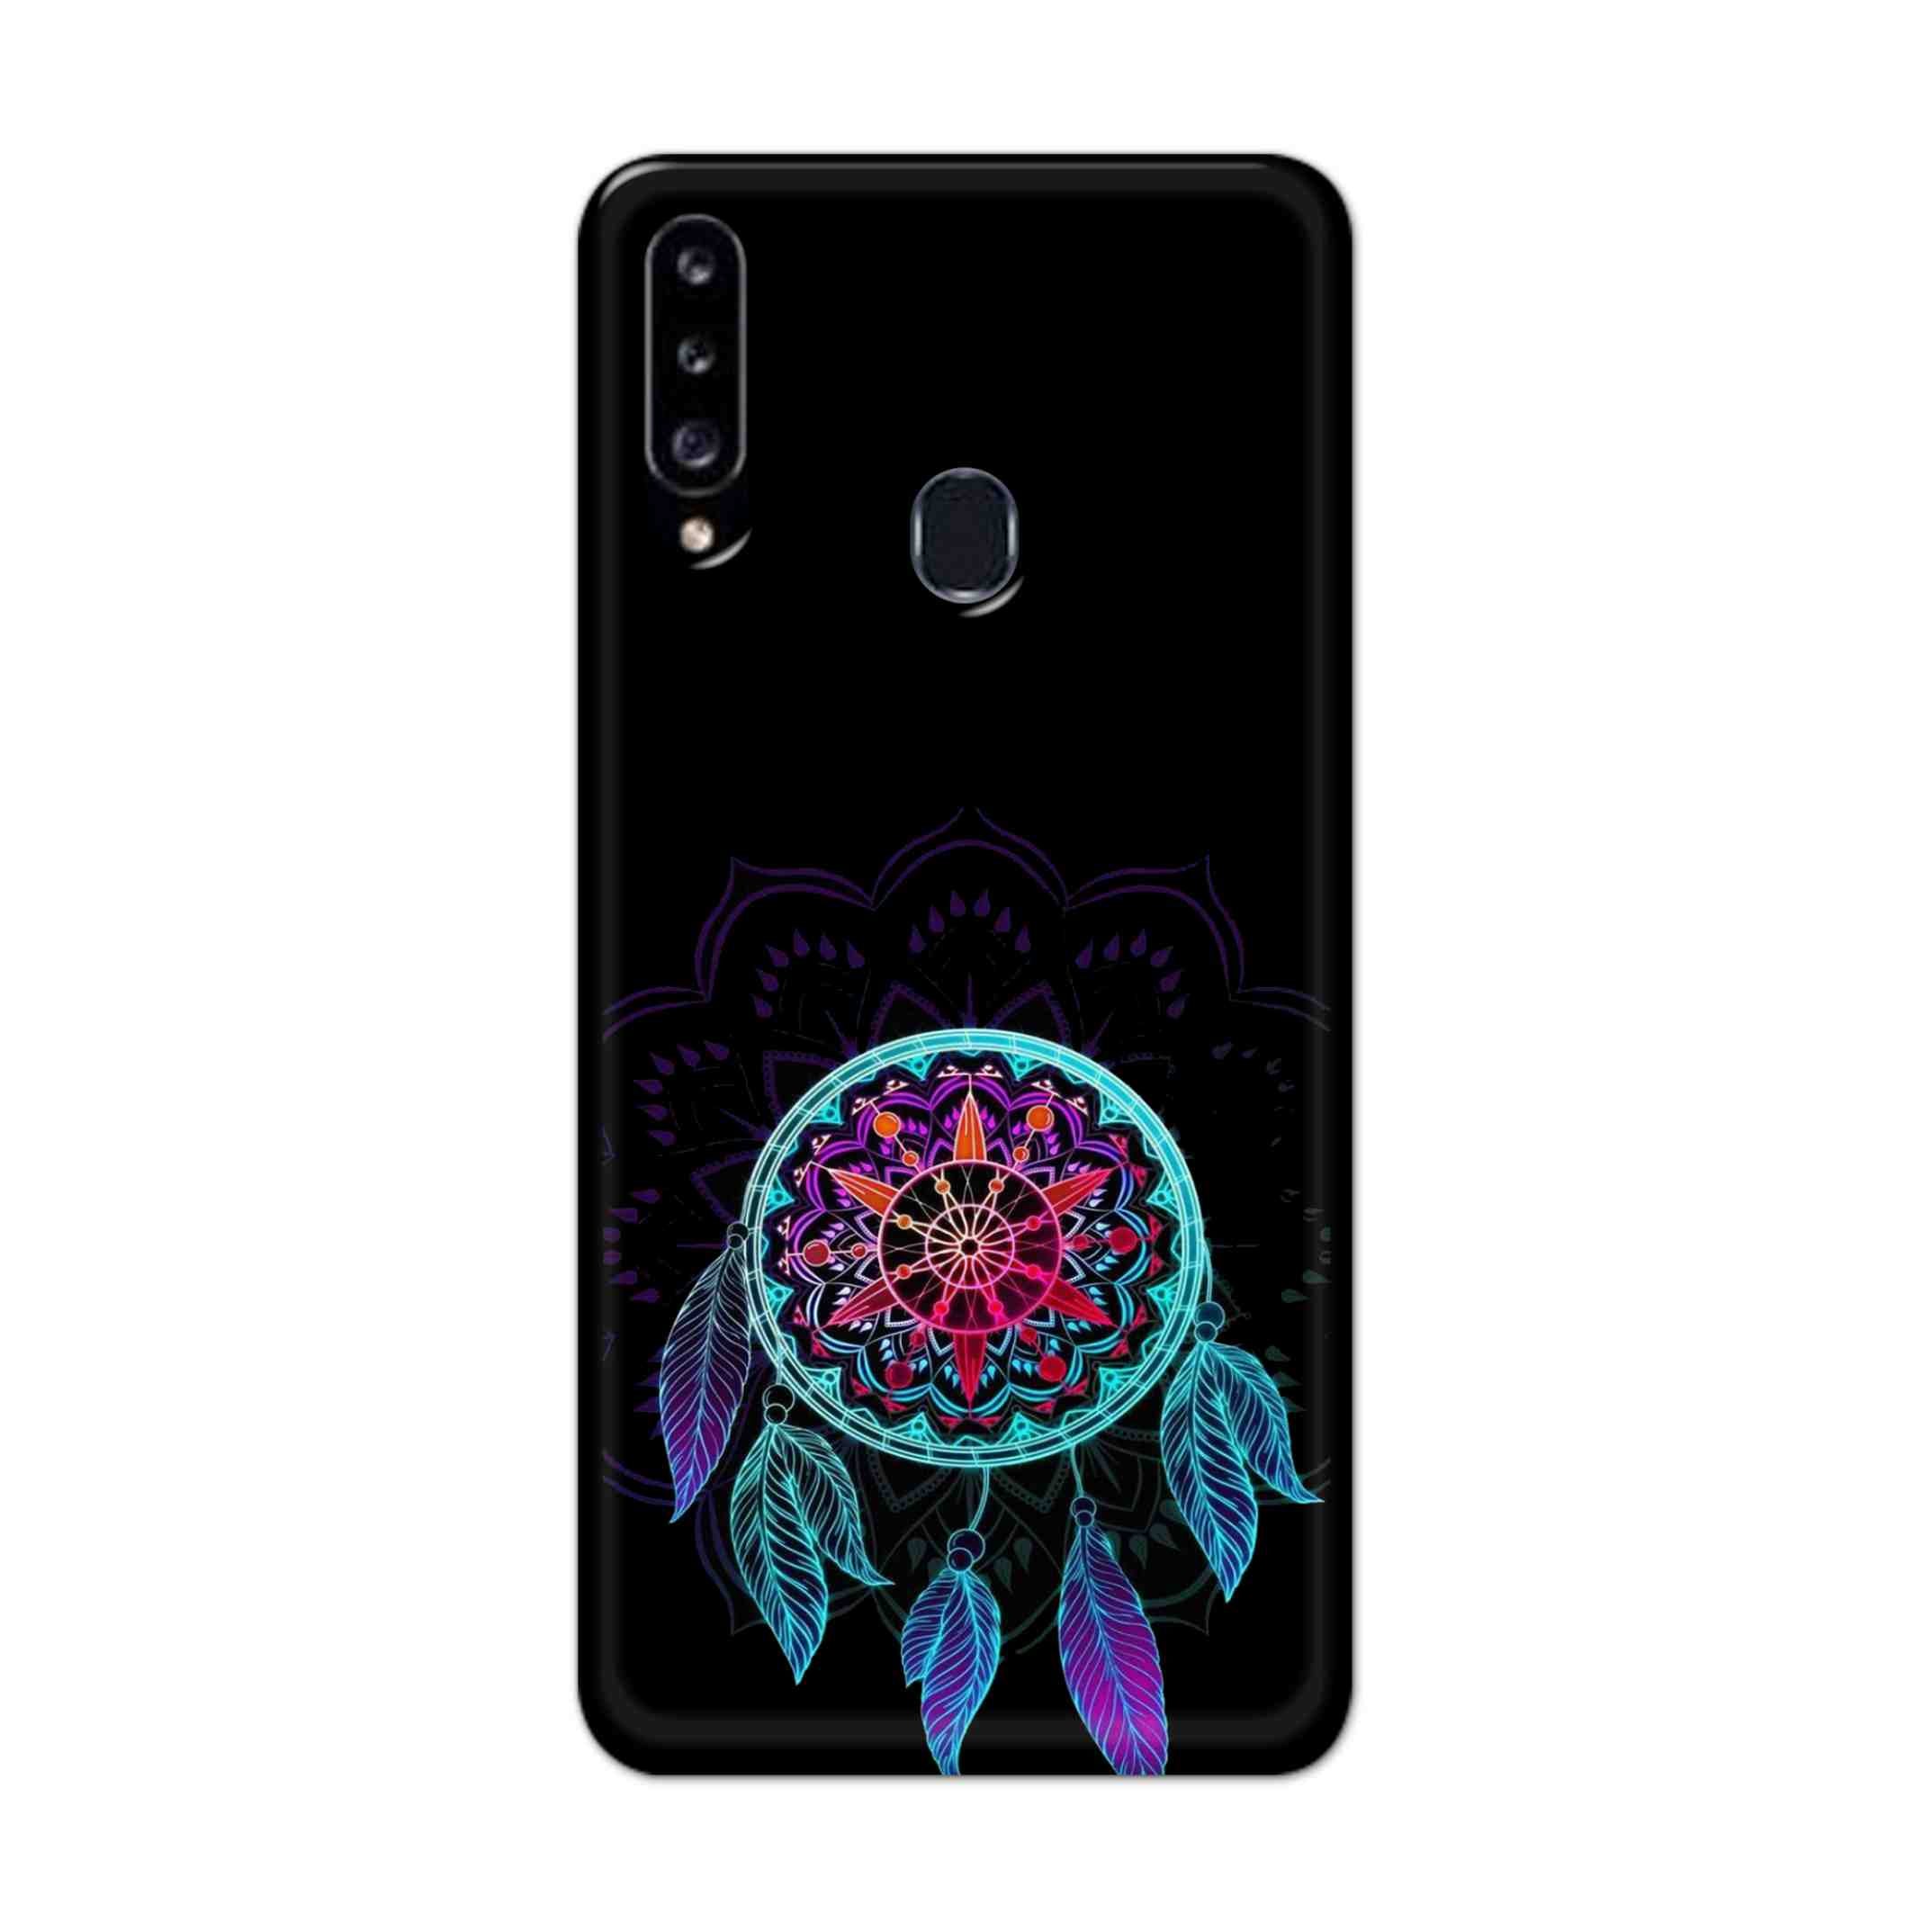 Buy Dream Catcher Hard Back Mobile Phone Case Cover For Samsung Galaxy A21 Online